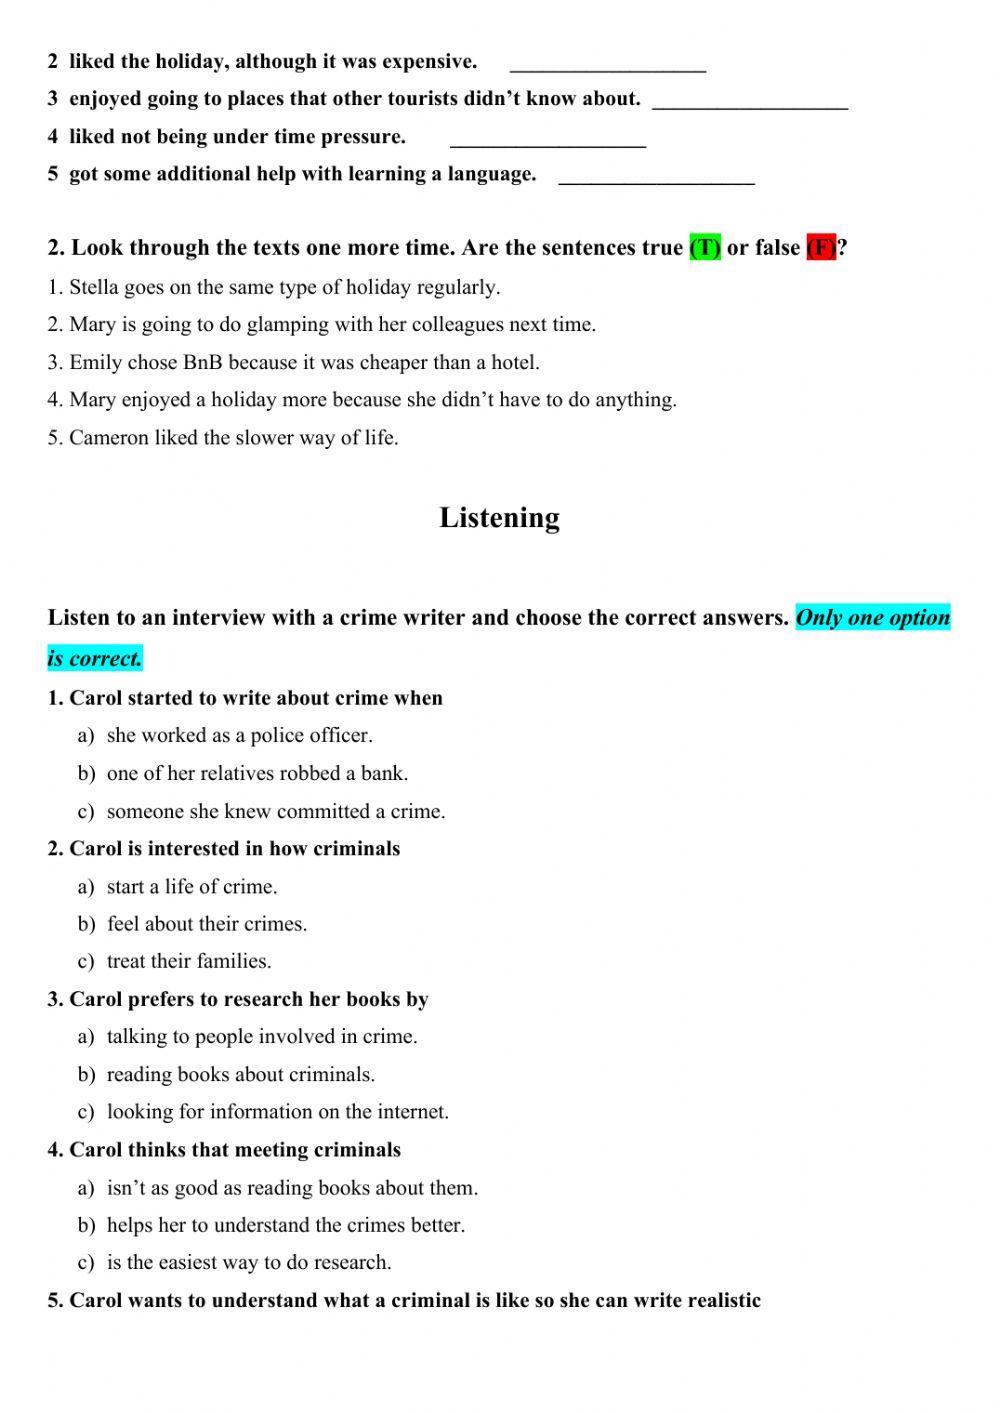 Reading and Listening Exam Solutions Pre-Intermediate